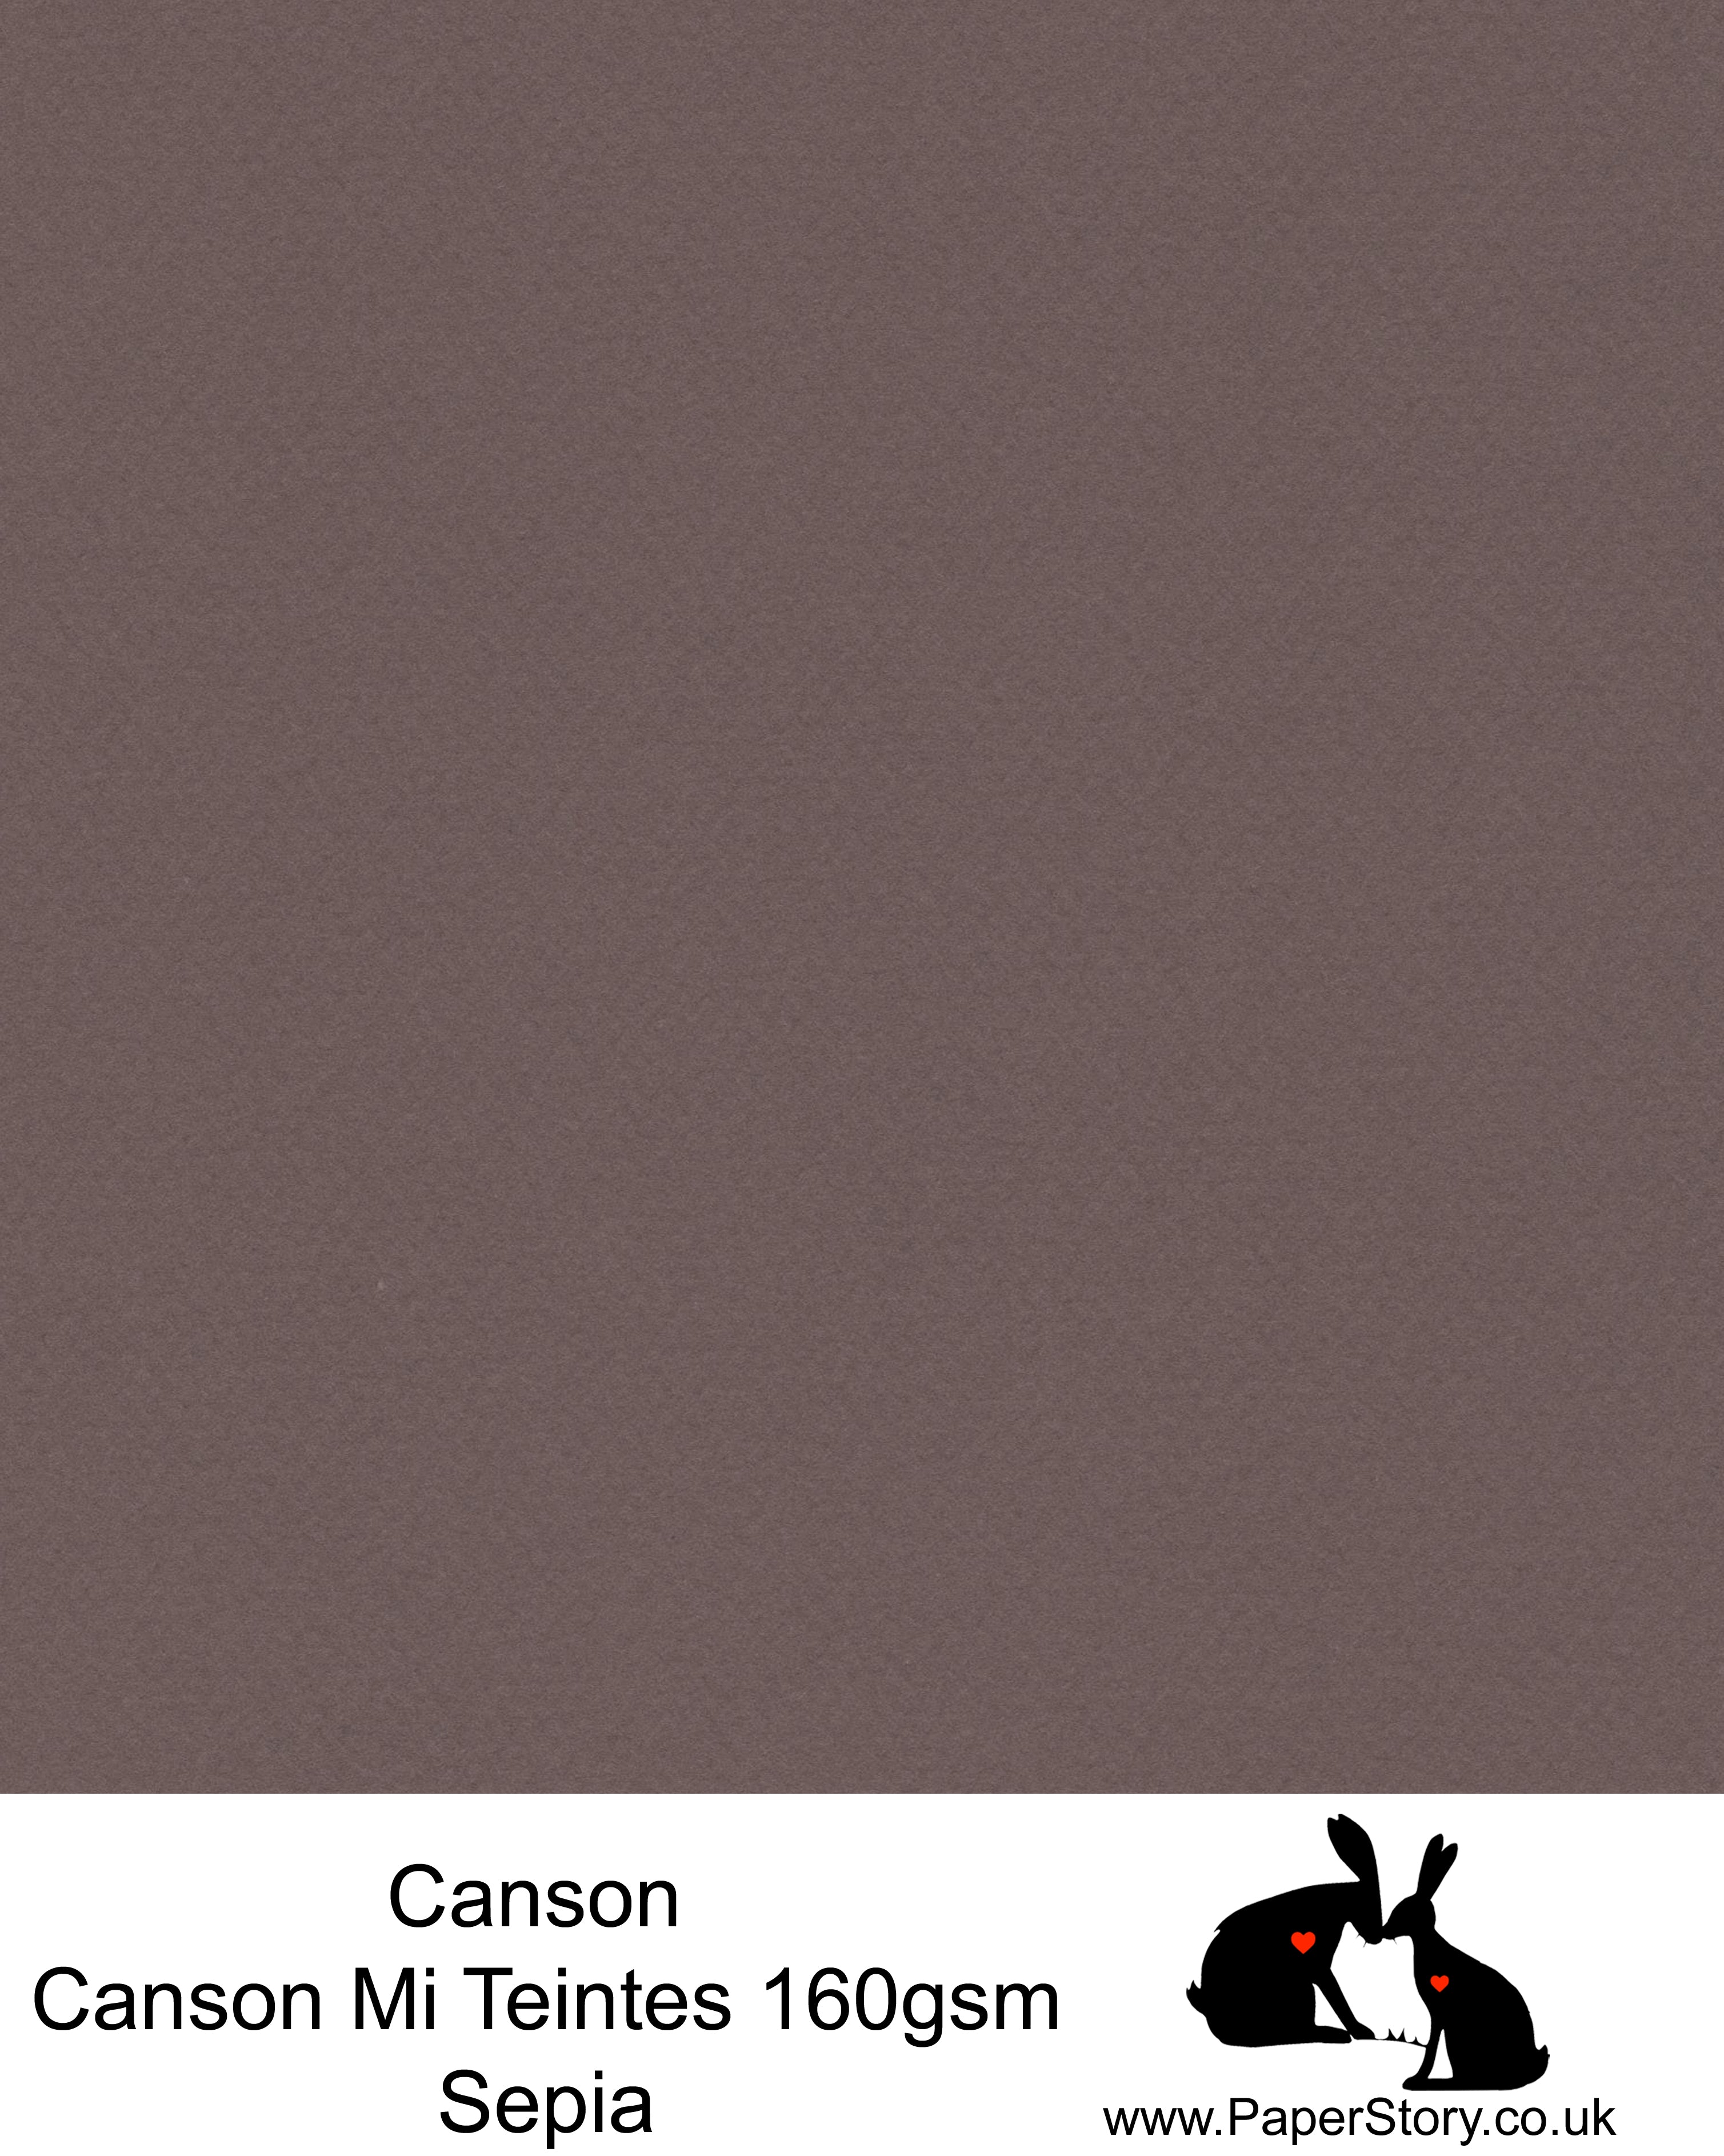 Canson Mi Teintes acid free, Sepia warm grey with a hint of brown, hammered texture honeycomb surface paper 160 gsm. This is a popular and classic paper for all artists especially well respected for Pastel  and Papercutting made famous by Paper Panda. This paper has a honeycombed finish one side and fine grain the other. An authentic art paper, acid free with a  very high 50% cotton content. Canson Mi-Teintes complies with the ISO 9706 standard on permanence, a guarantee of excellent conservation  